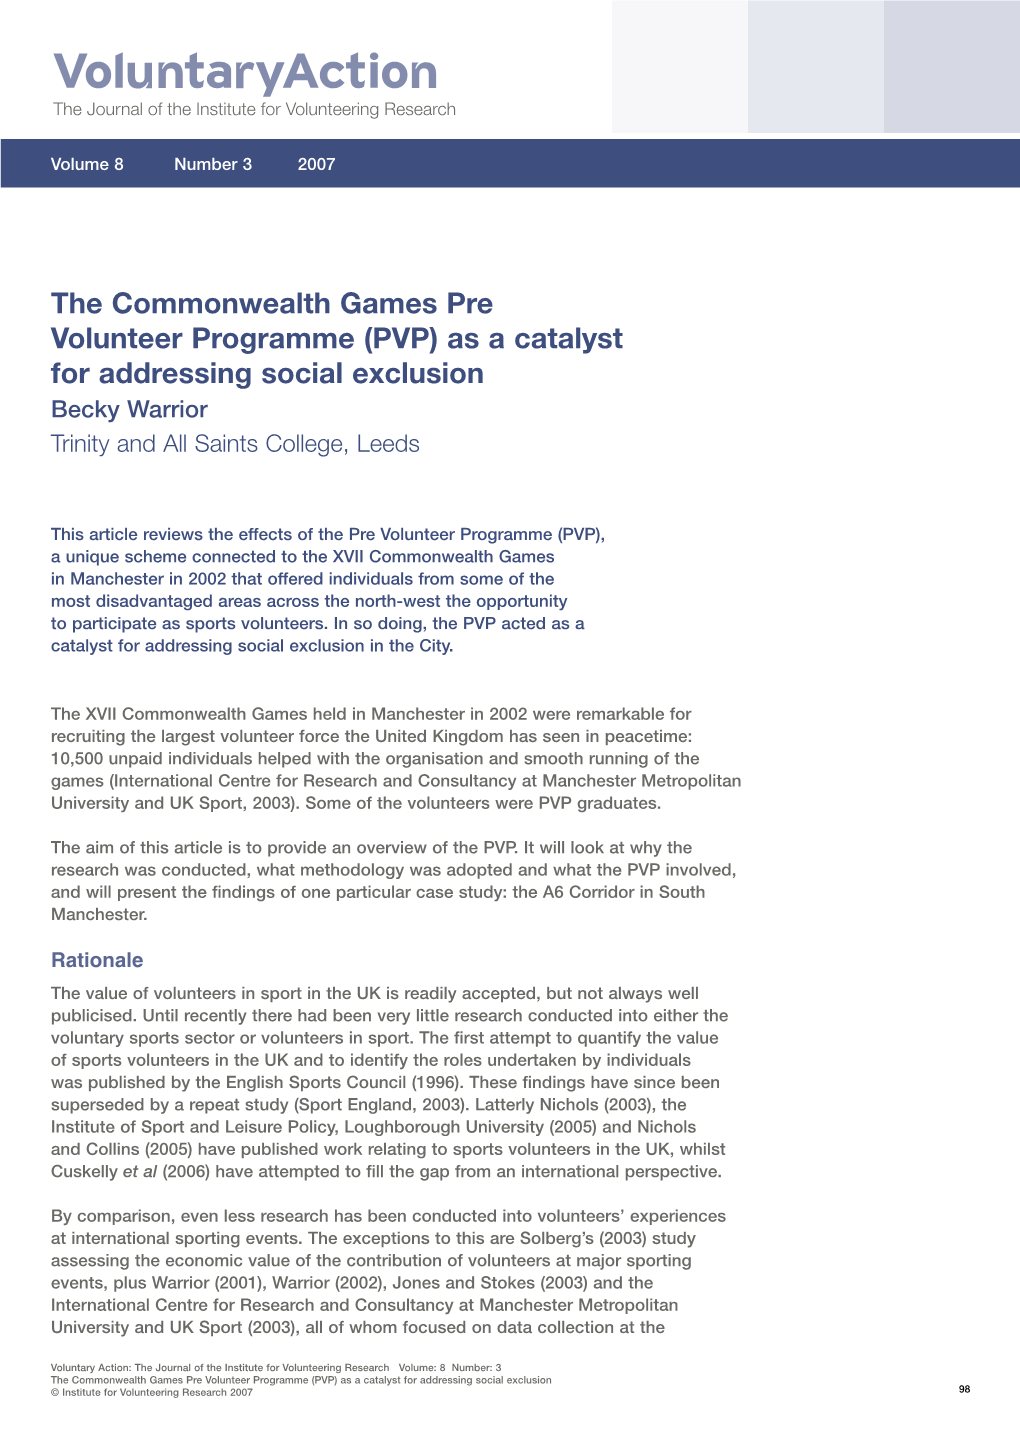 The Commonwealth Games Pre Volunteer Programme (PVP) As a Catalyst for Addressing Social Exclusion Becky Warrior Trinity and All Saints College, Leeds